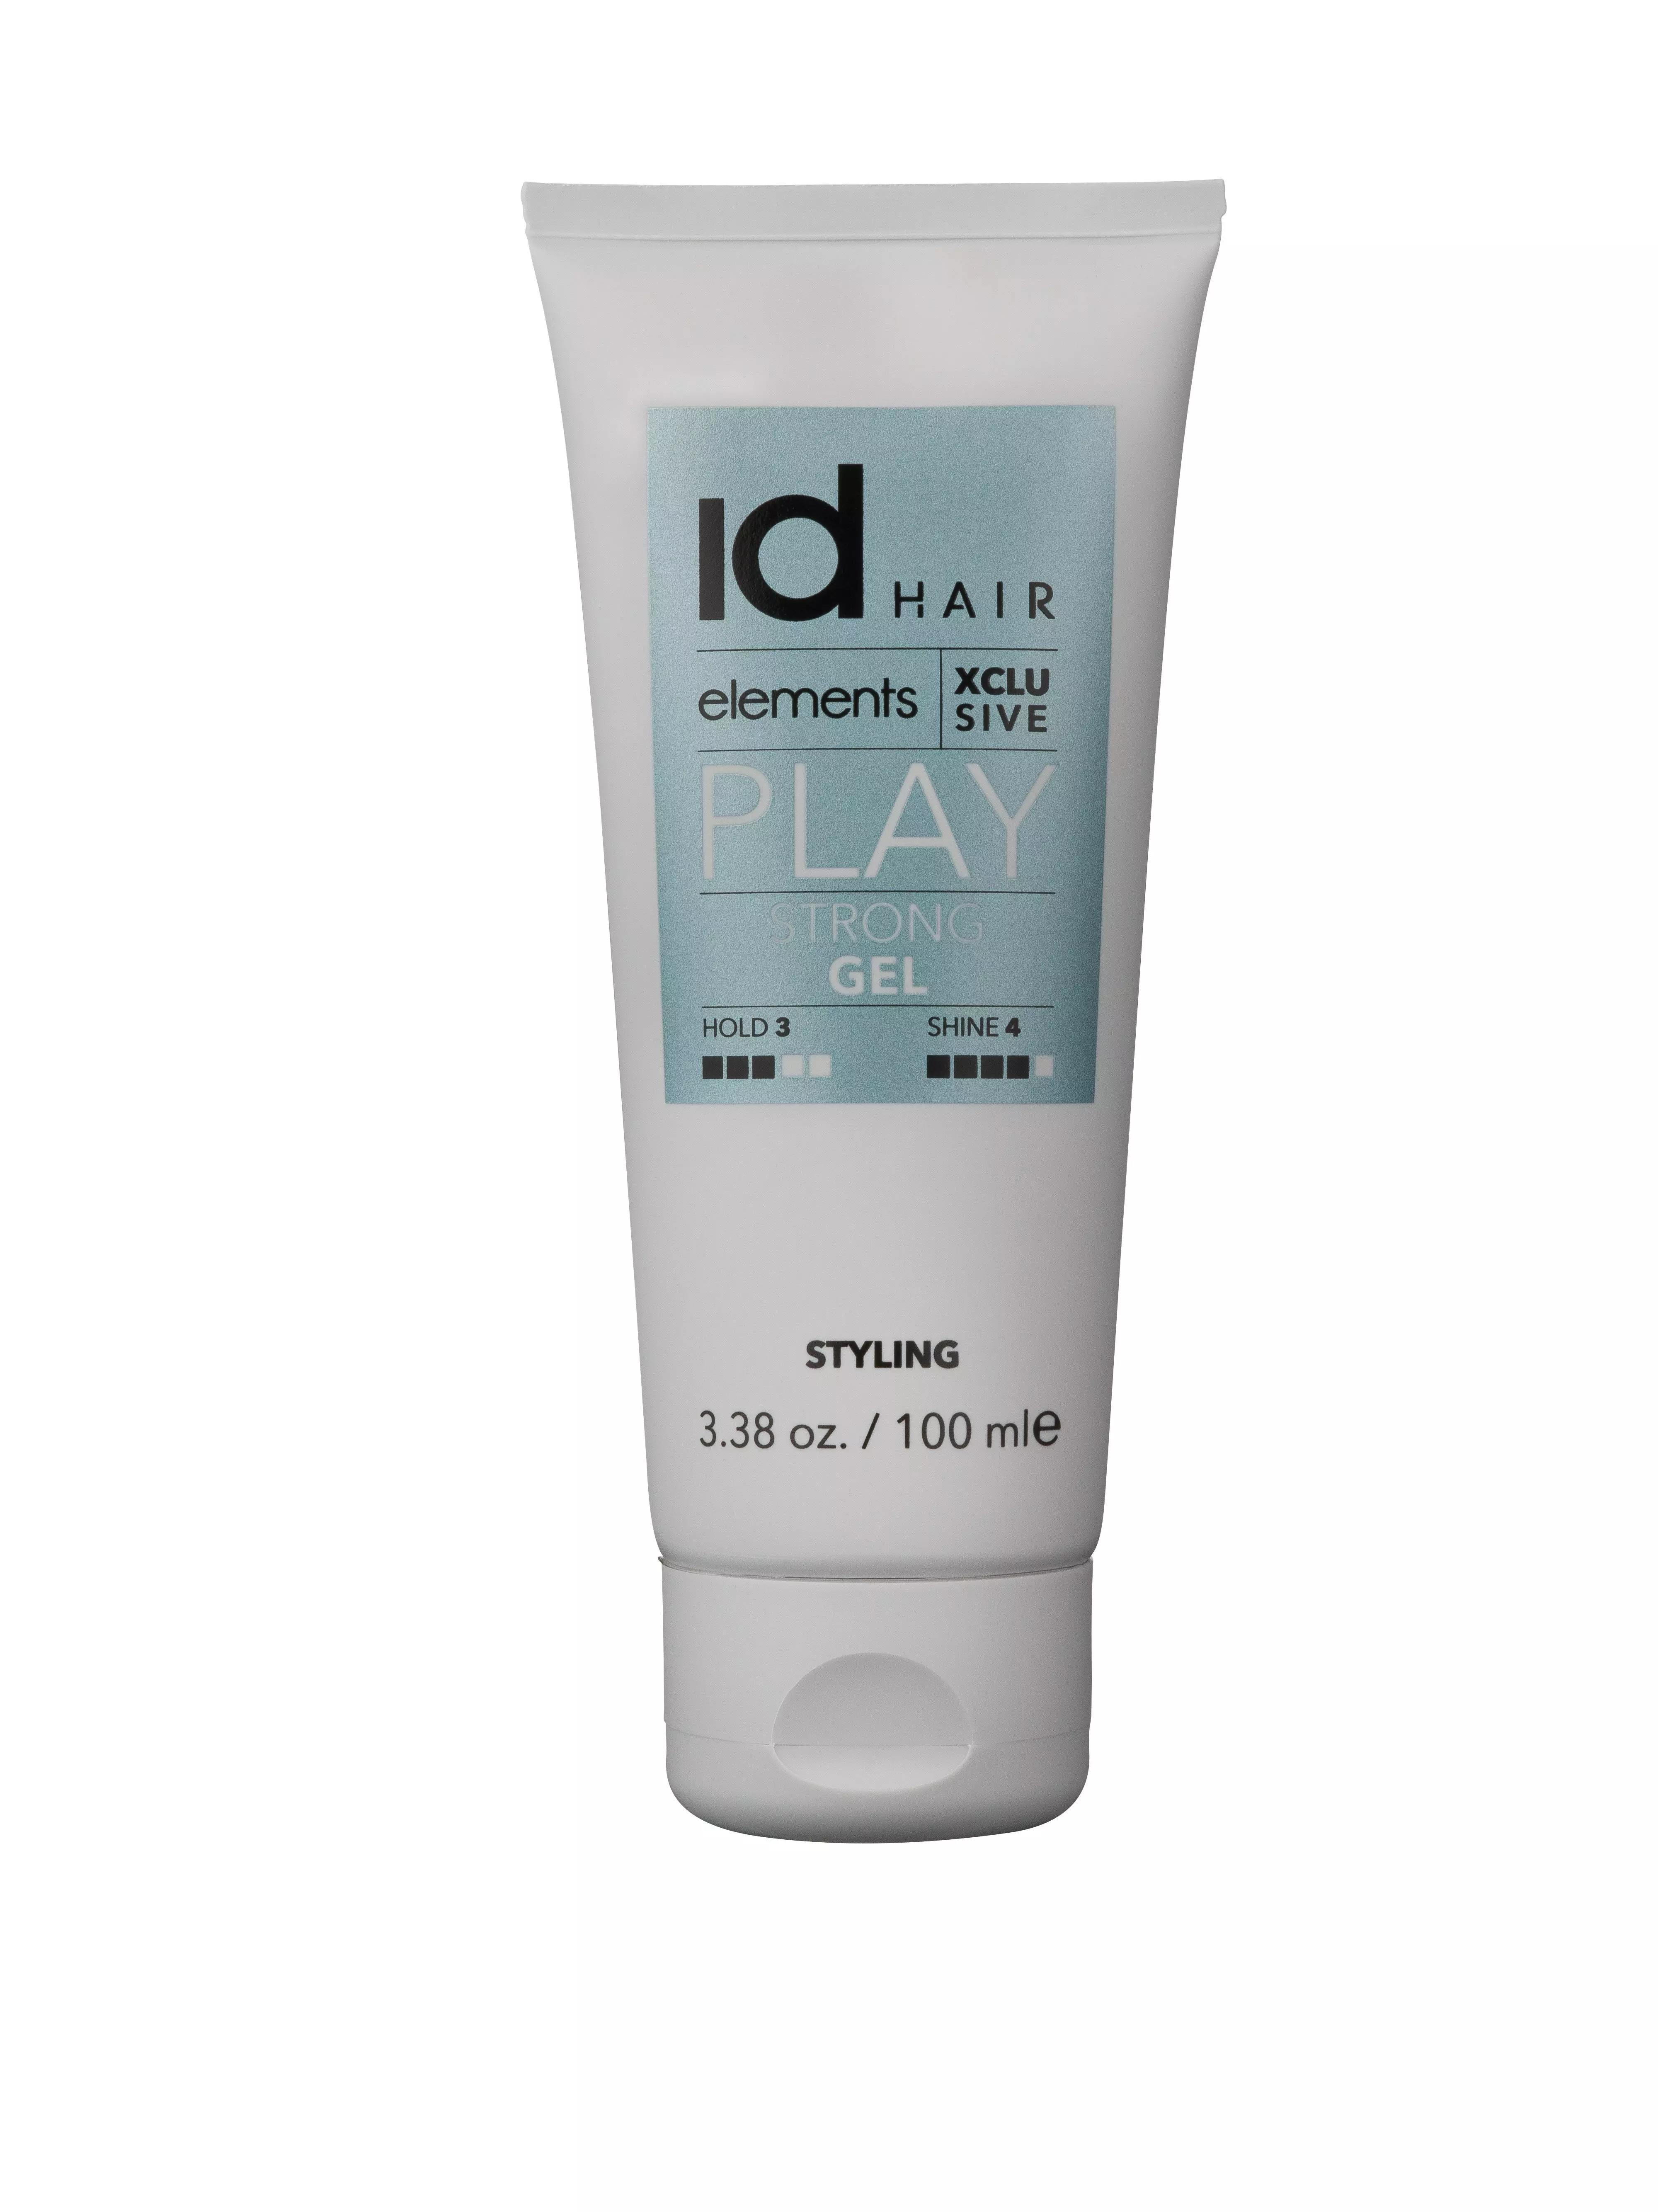 Idhair Elements Xclusive Strong Gel Ml